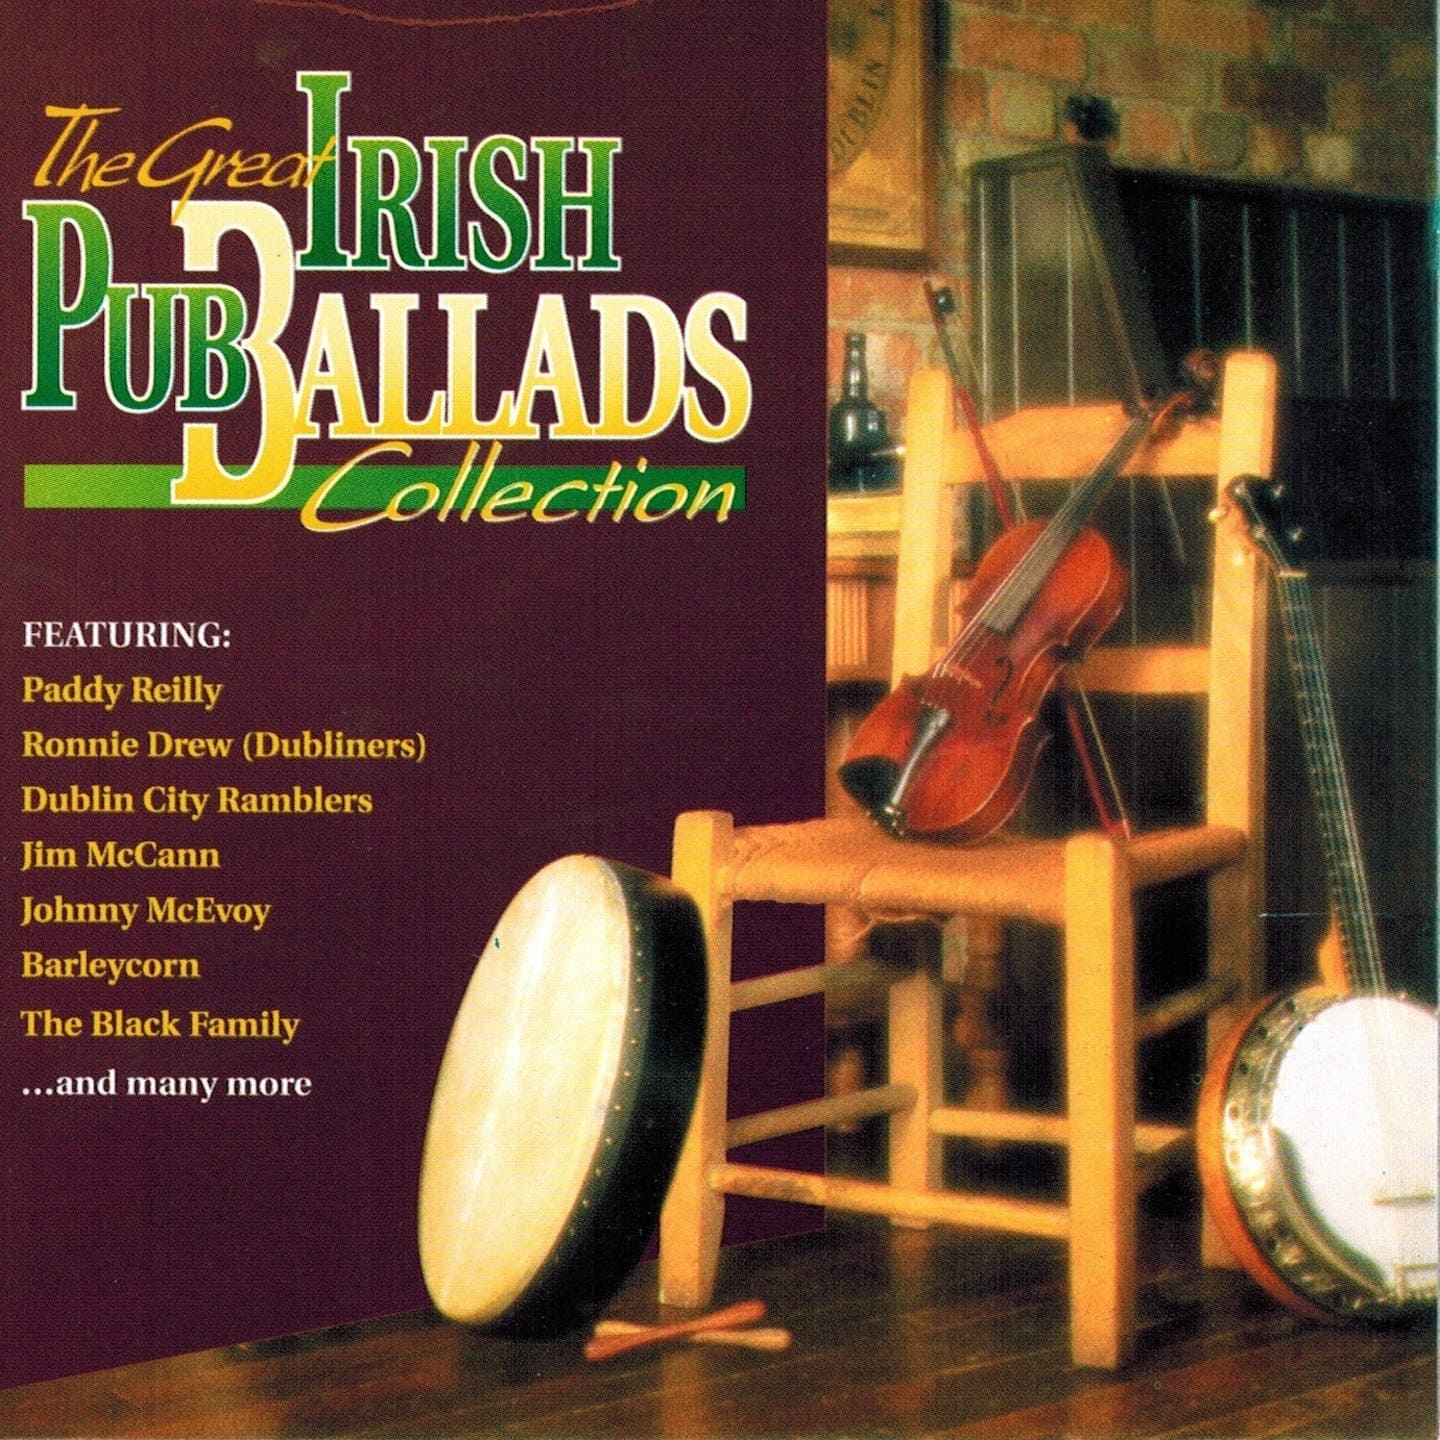 The Great Irish Pub Ballads Collection - Various Artists [CD]